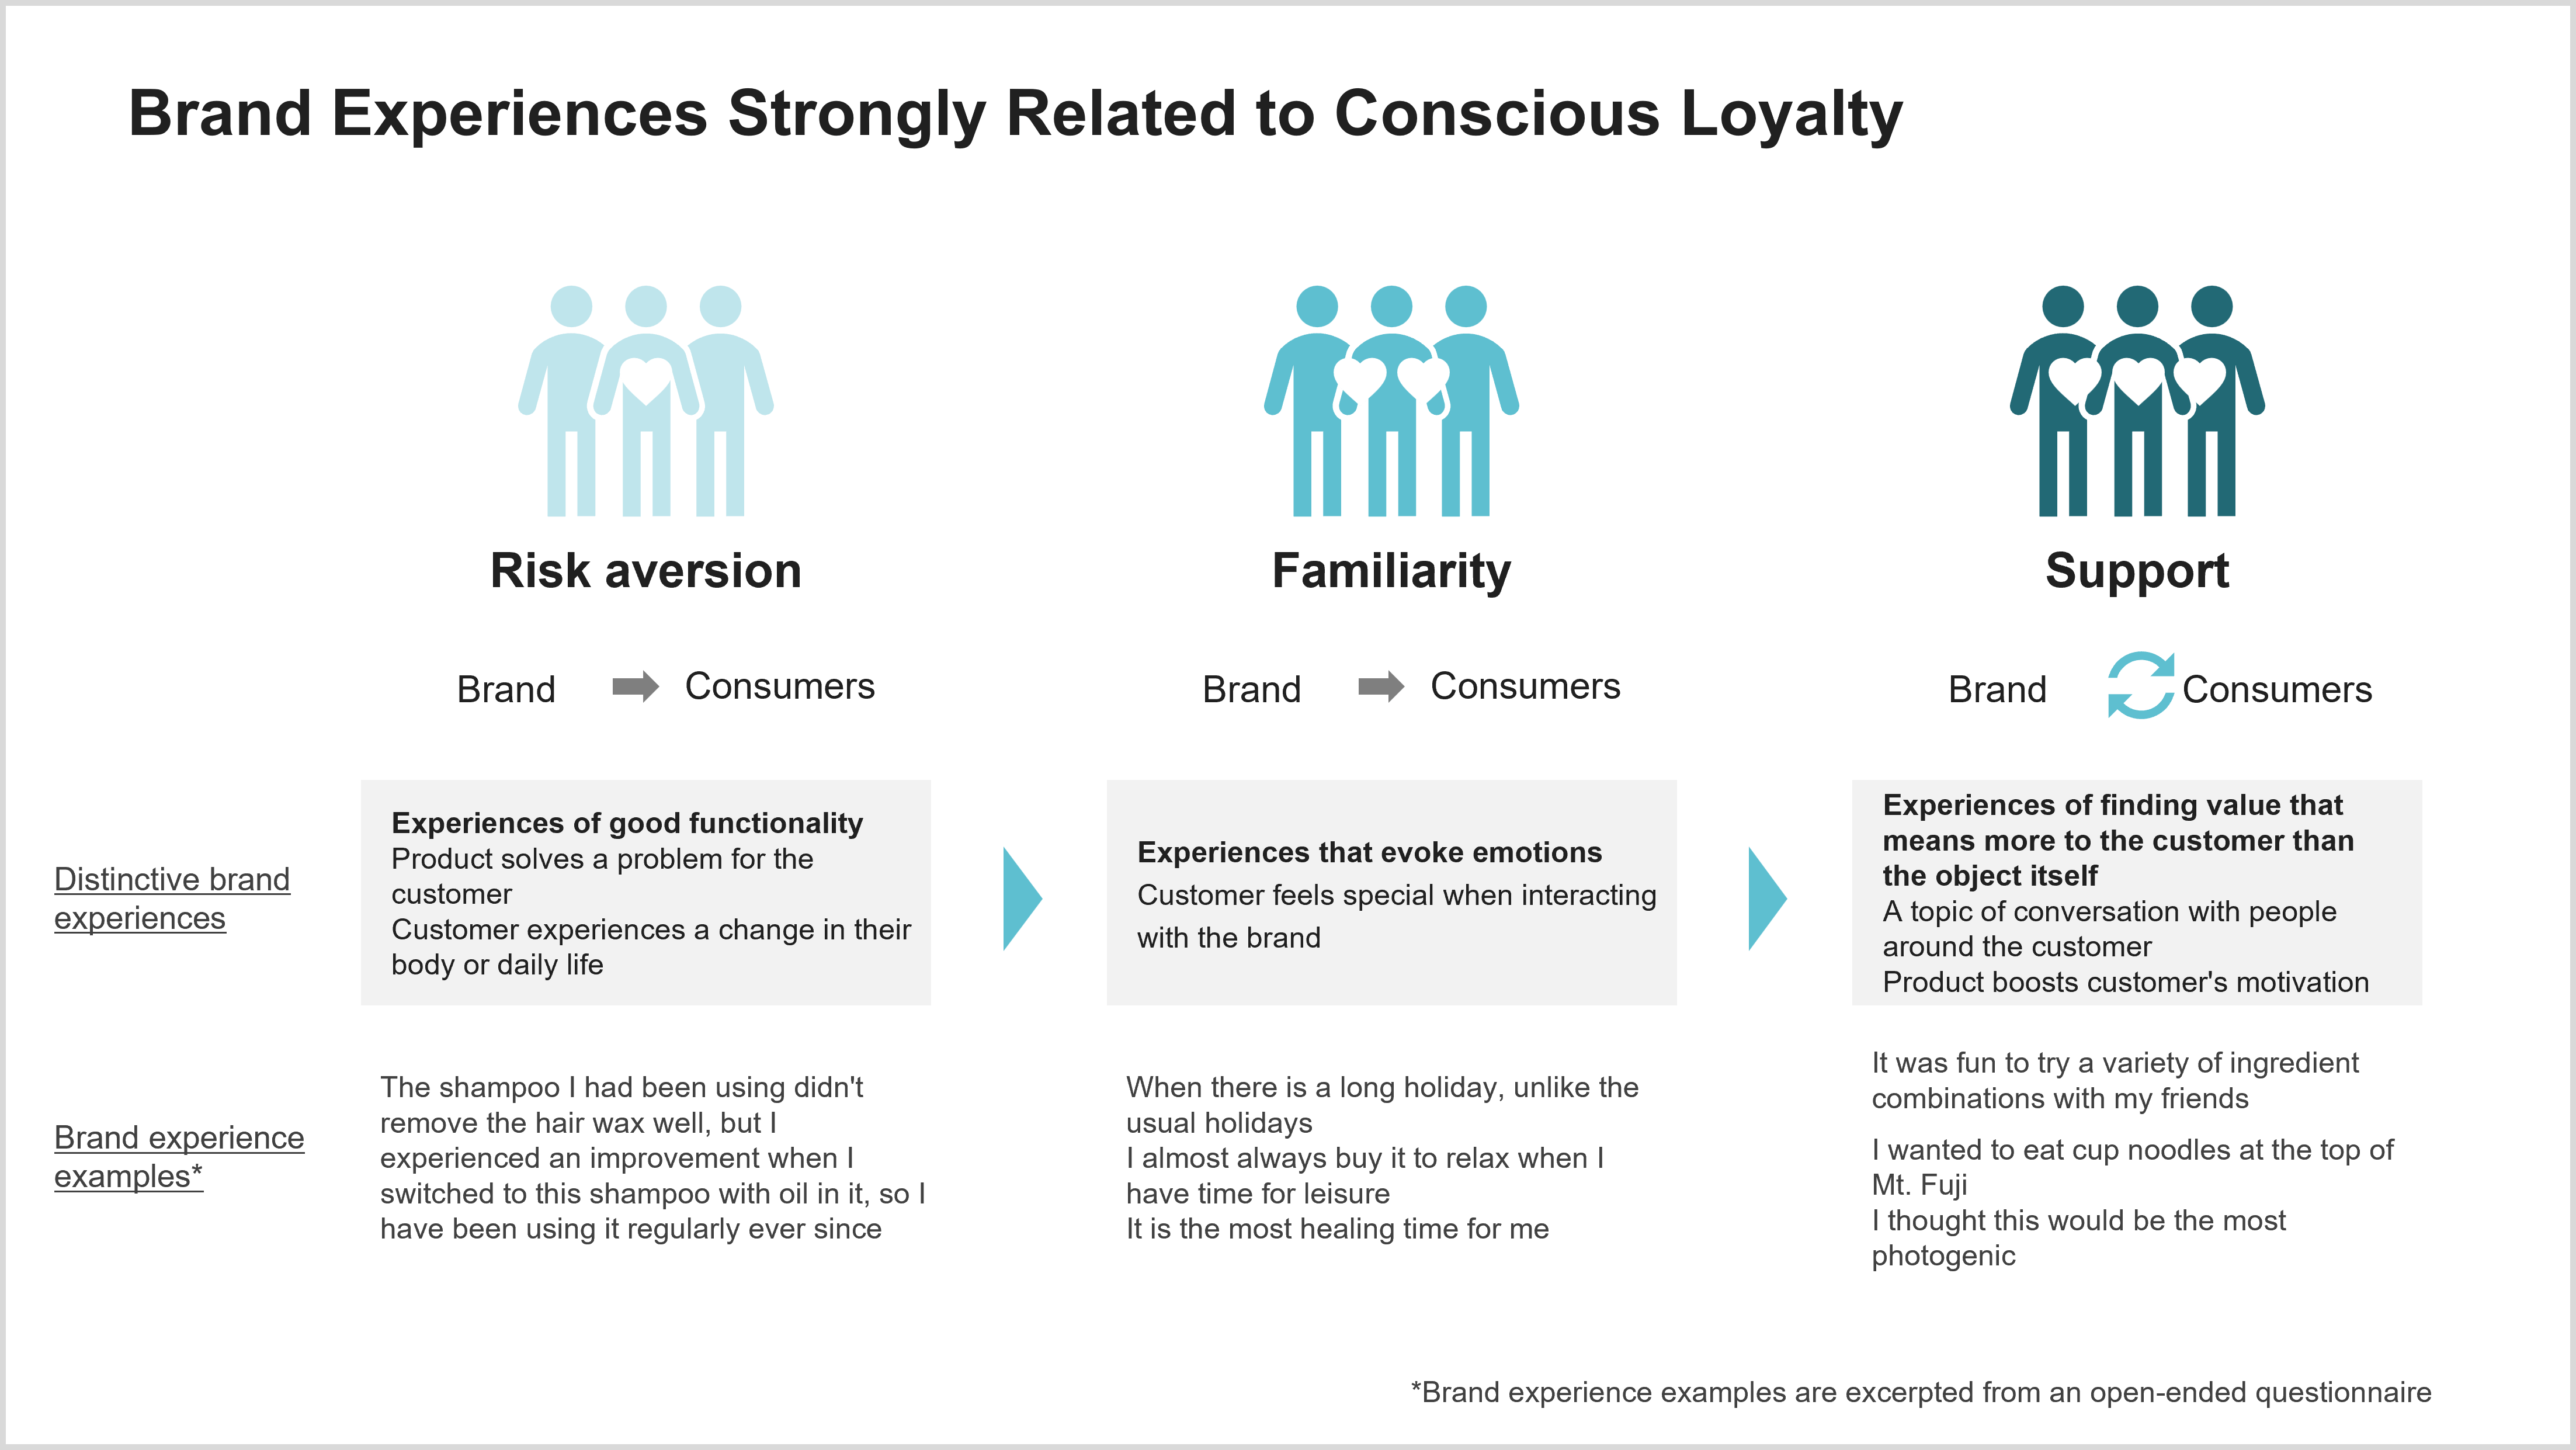 Brand Experiences Strongly Related to Conscious Loyalty